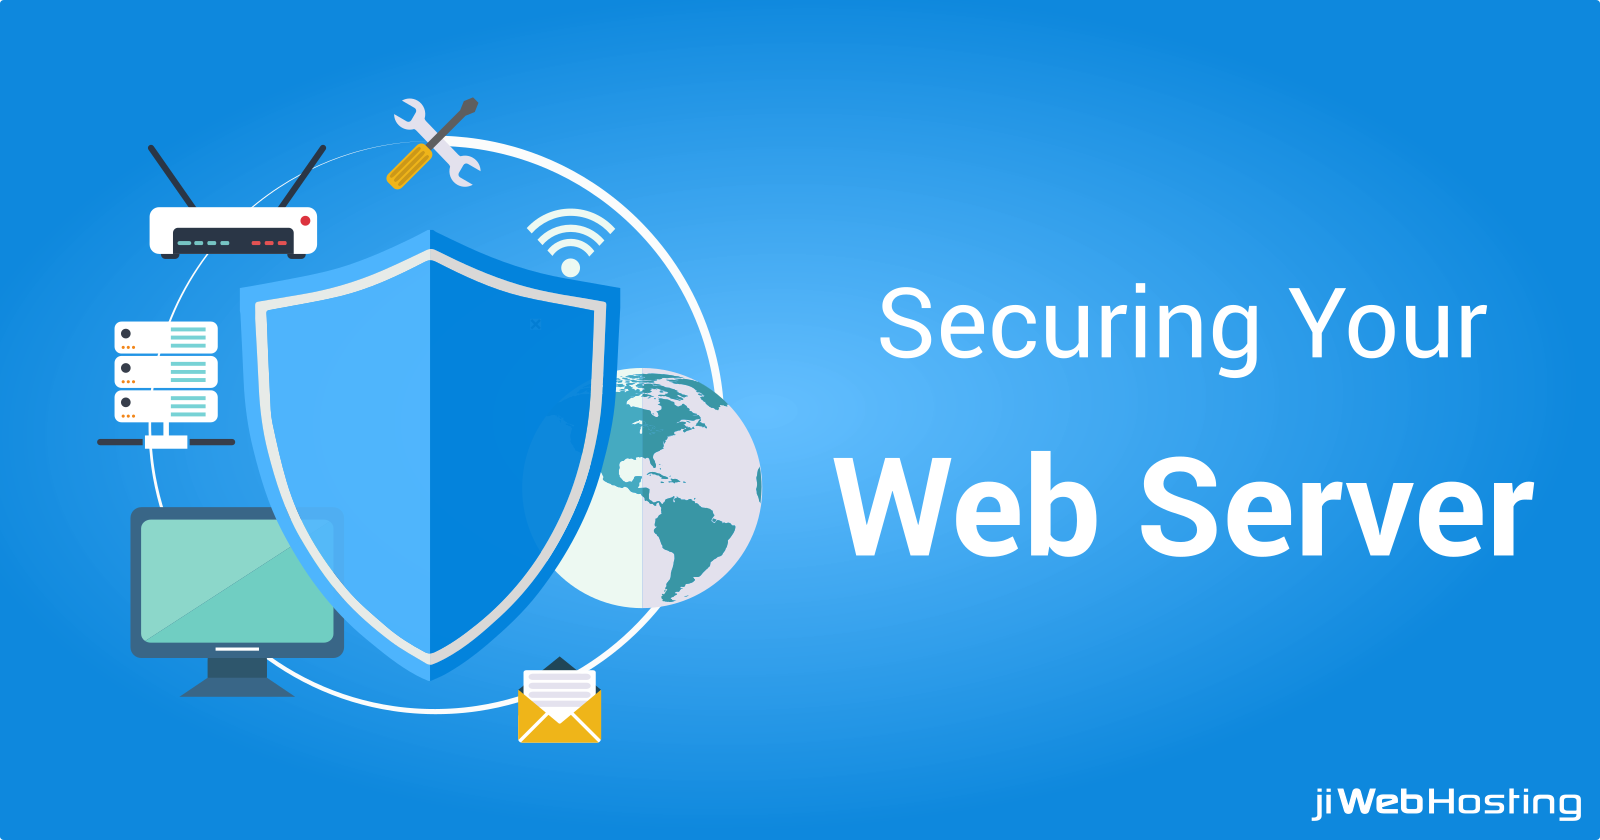 How to Secure your Web Server?